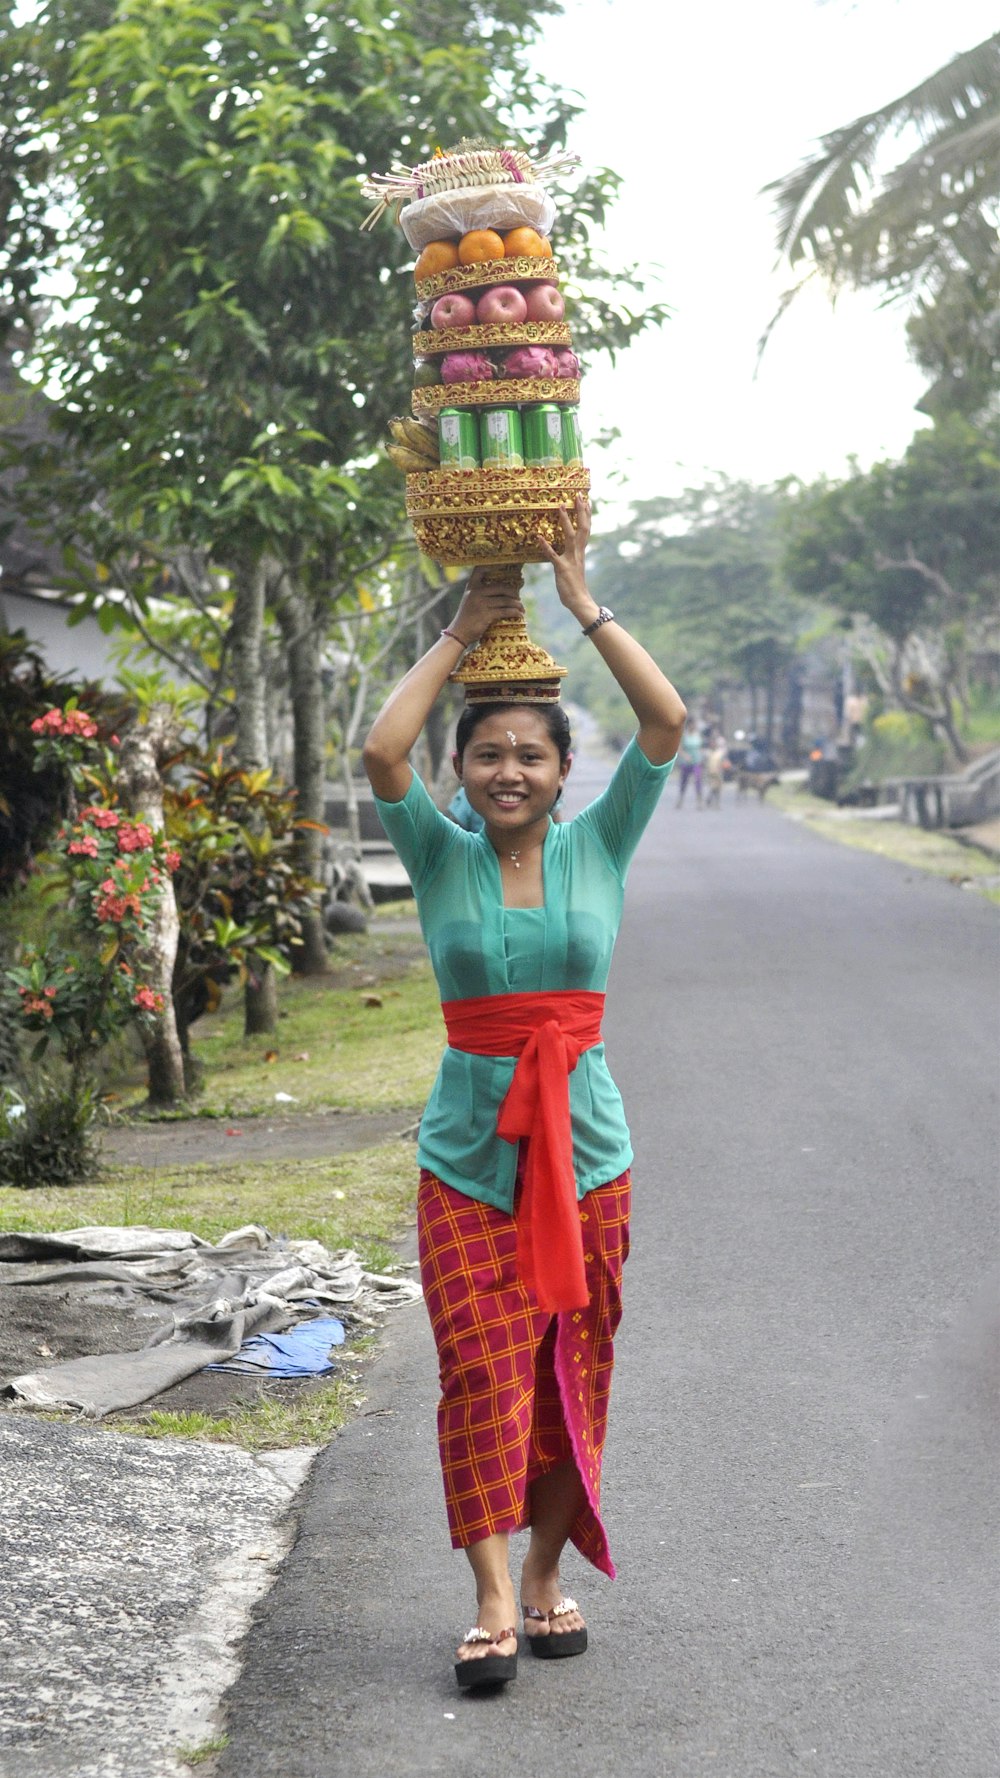 woman carrying baskets